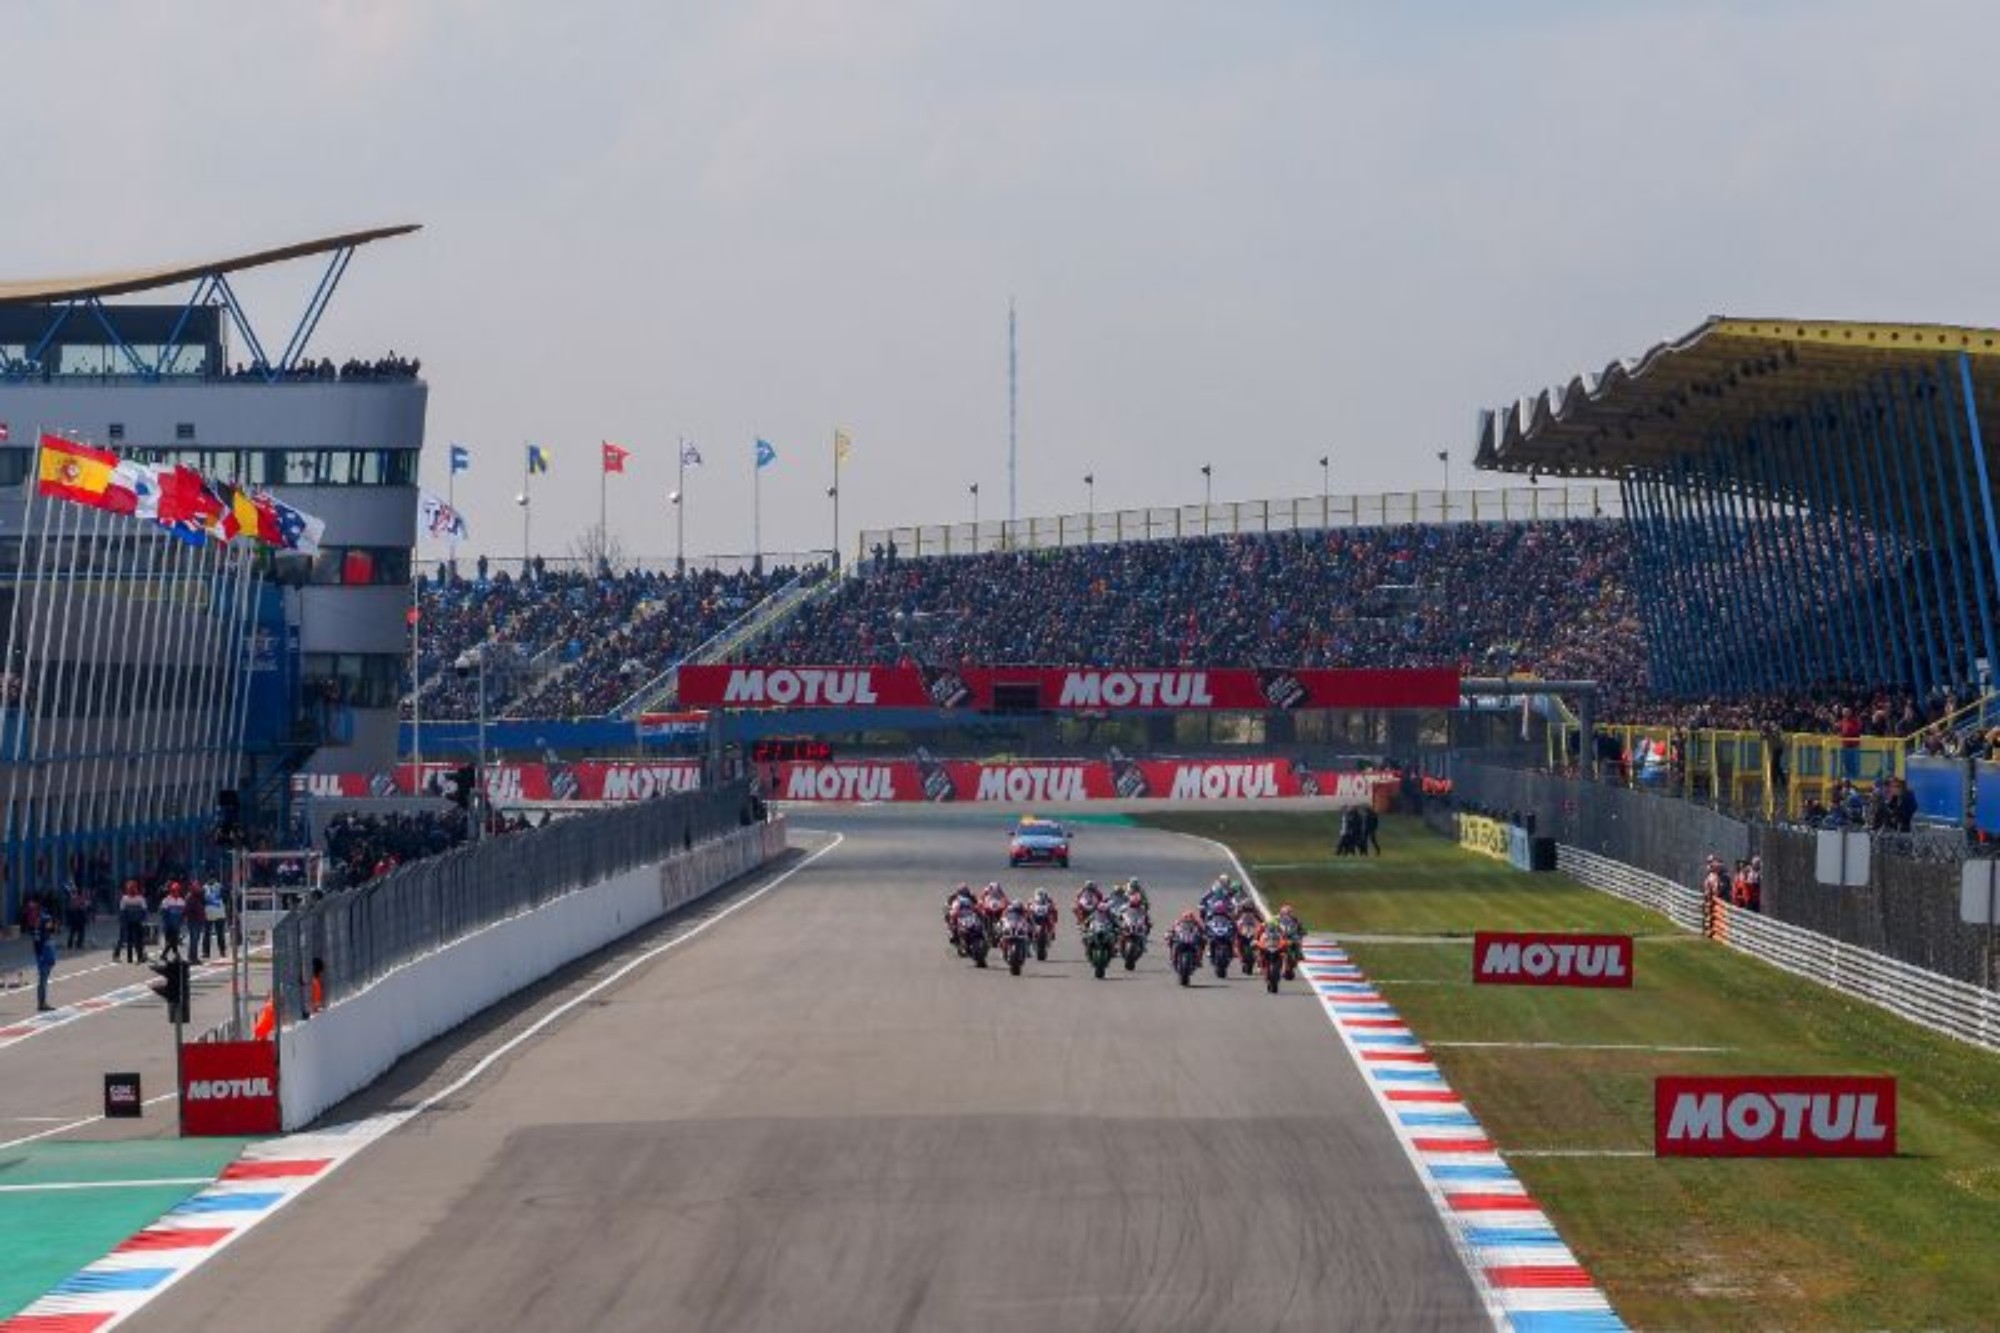 World Superbike: Race Two Results From TT Circuit Assen (Updated) Roadracing World Magazine | Motorcycle Riding, Racing & Tech News